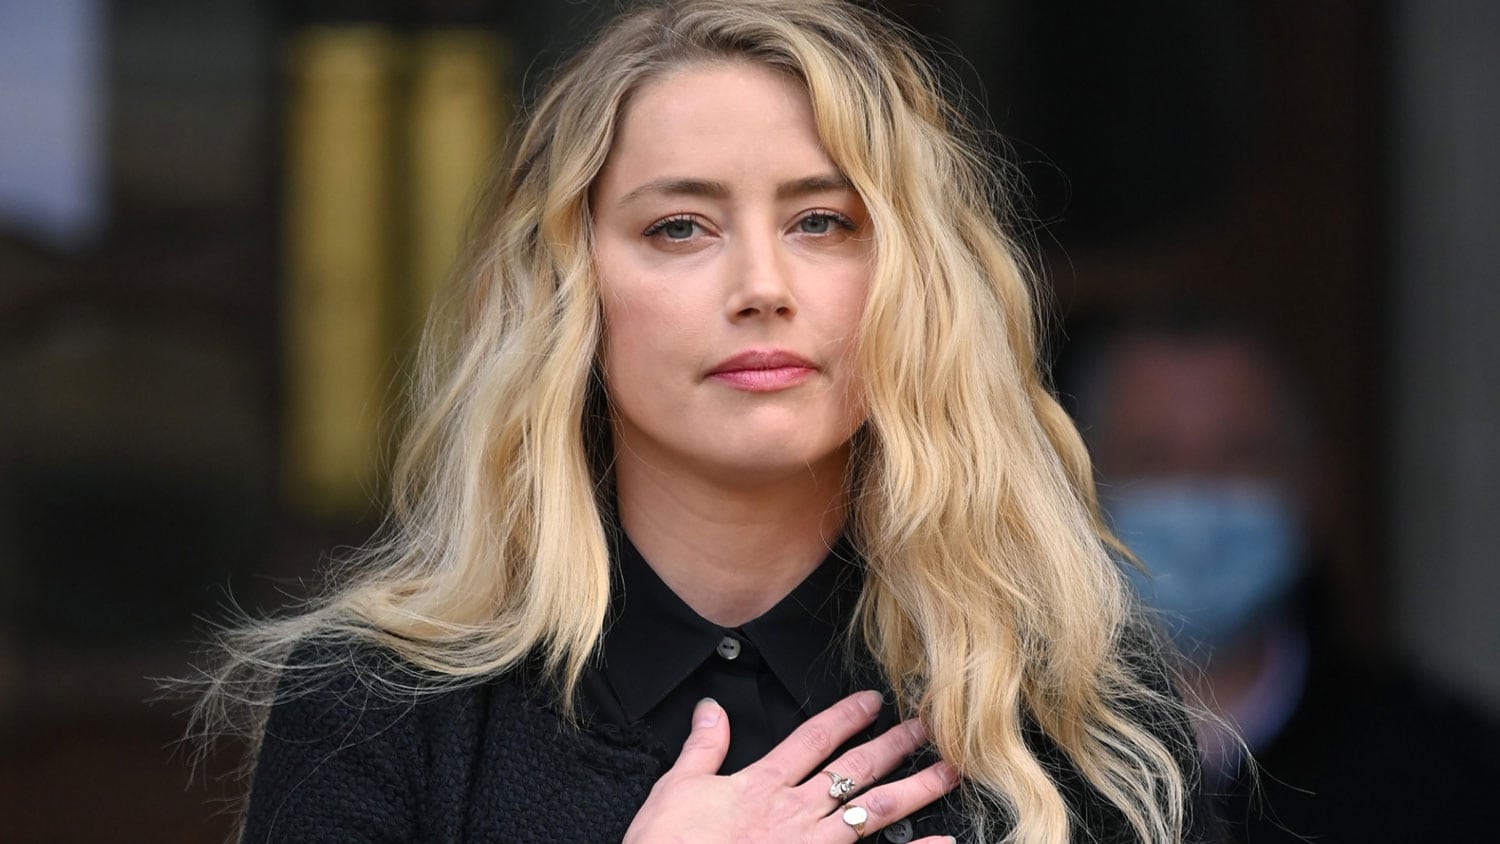 Amber Head Porno - Amber Heard Reportedly Offered $10M To Star In An Adult Movie